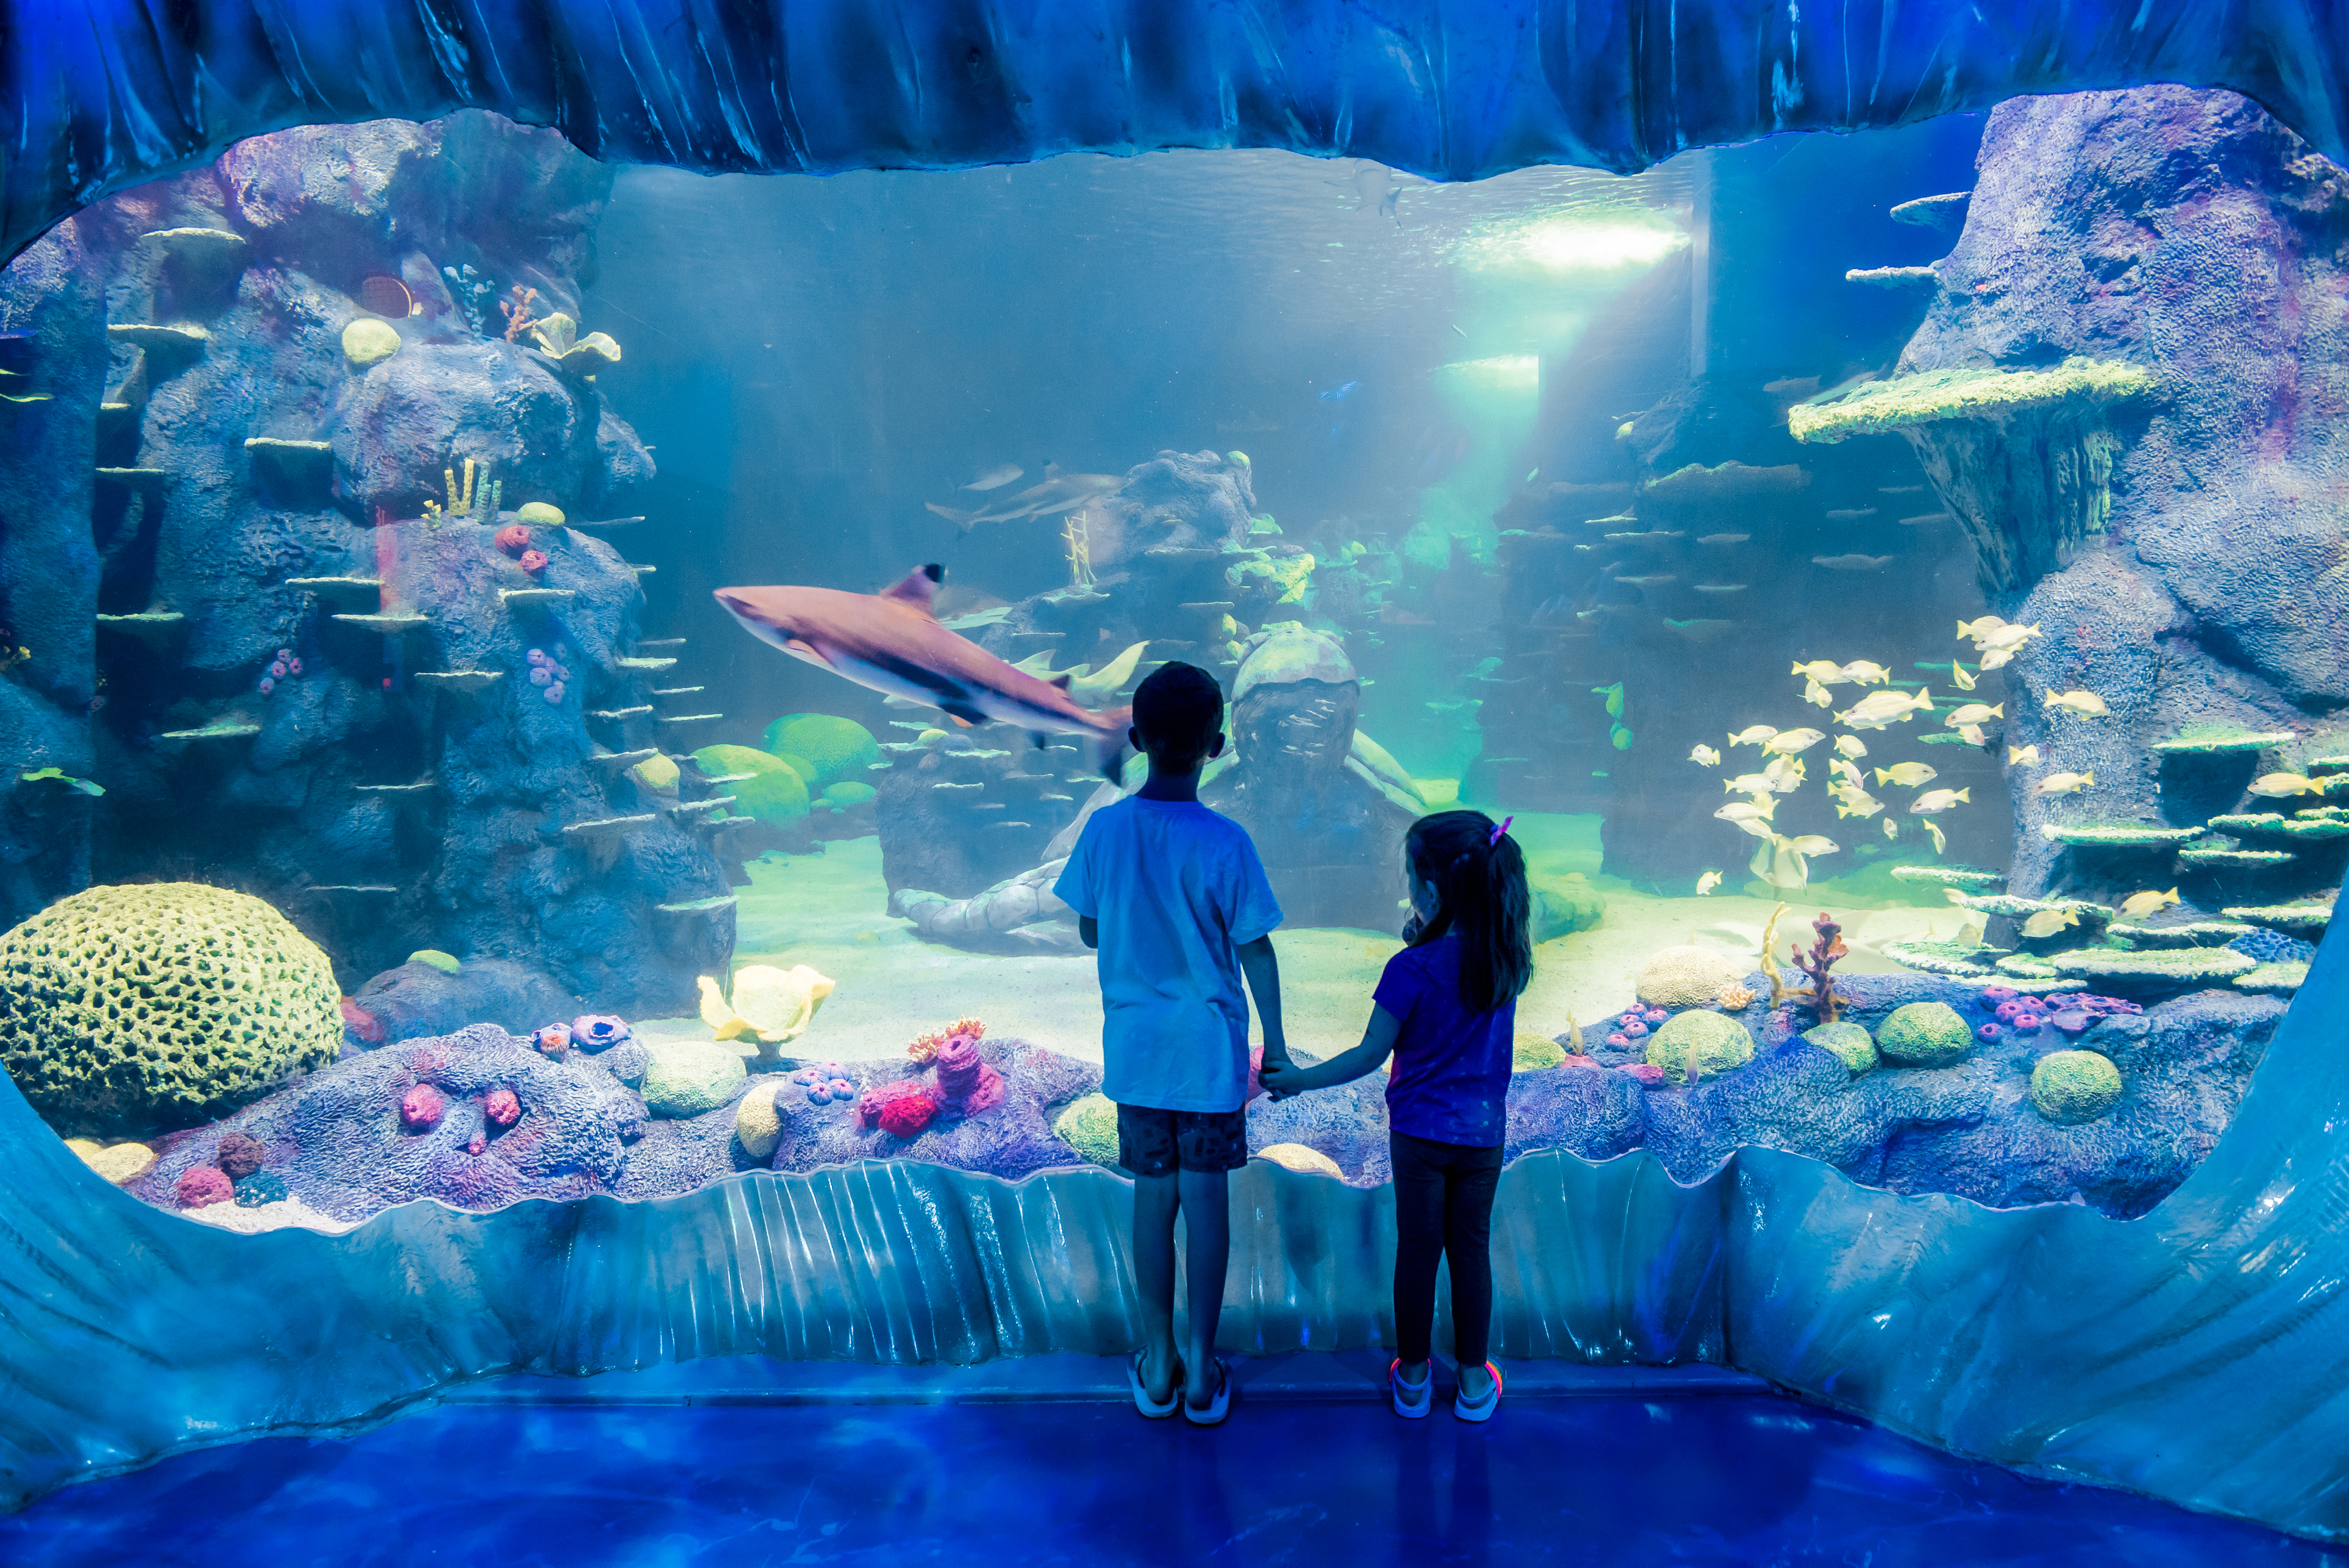 Kids Watch The Nurse Shark Swim By In Day And Night On The Reef Exhbiit